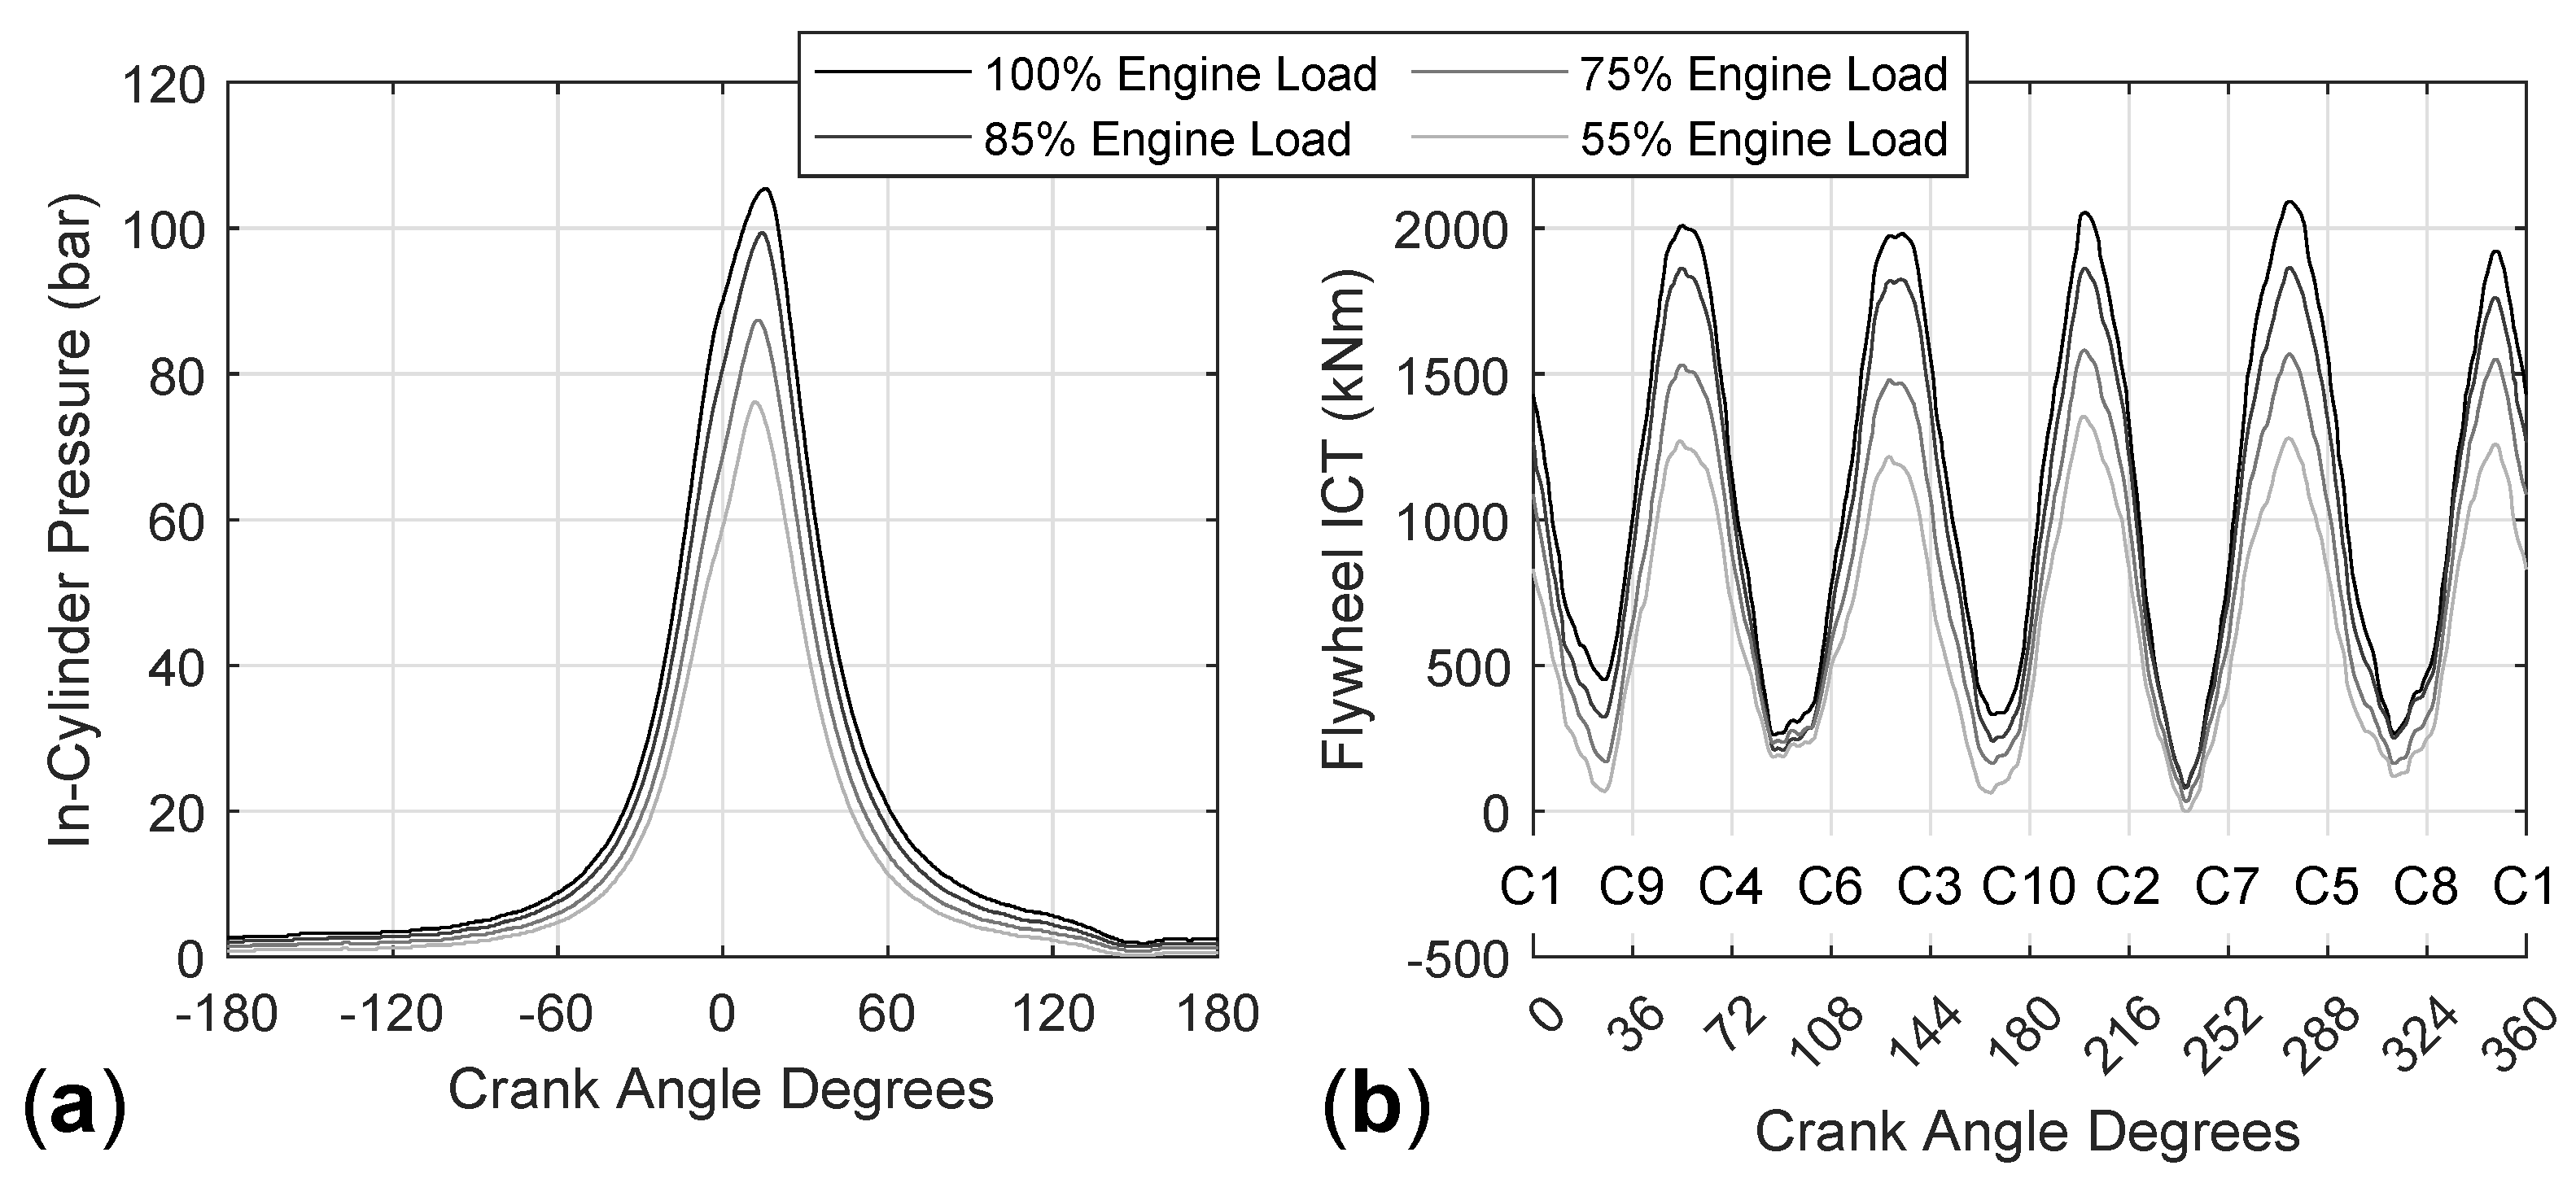 In-cylinder pressure to crank angle at various boost pressures with